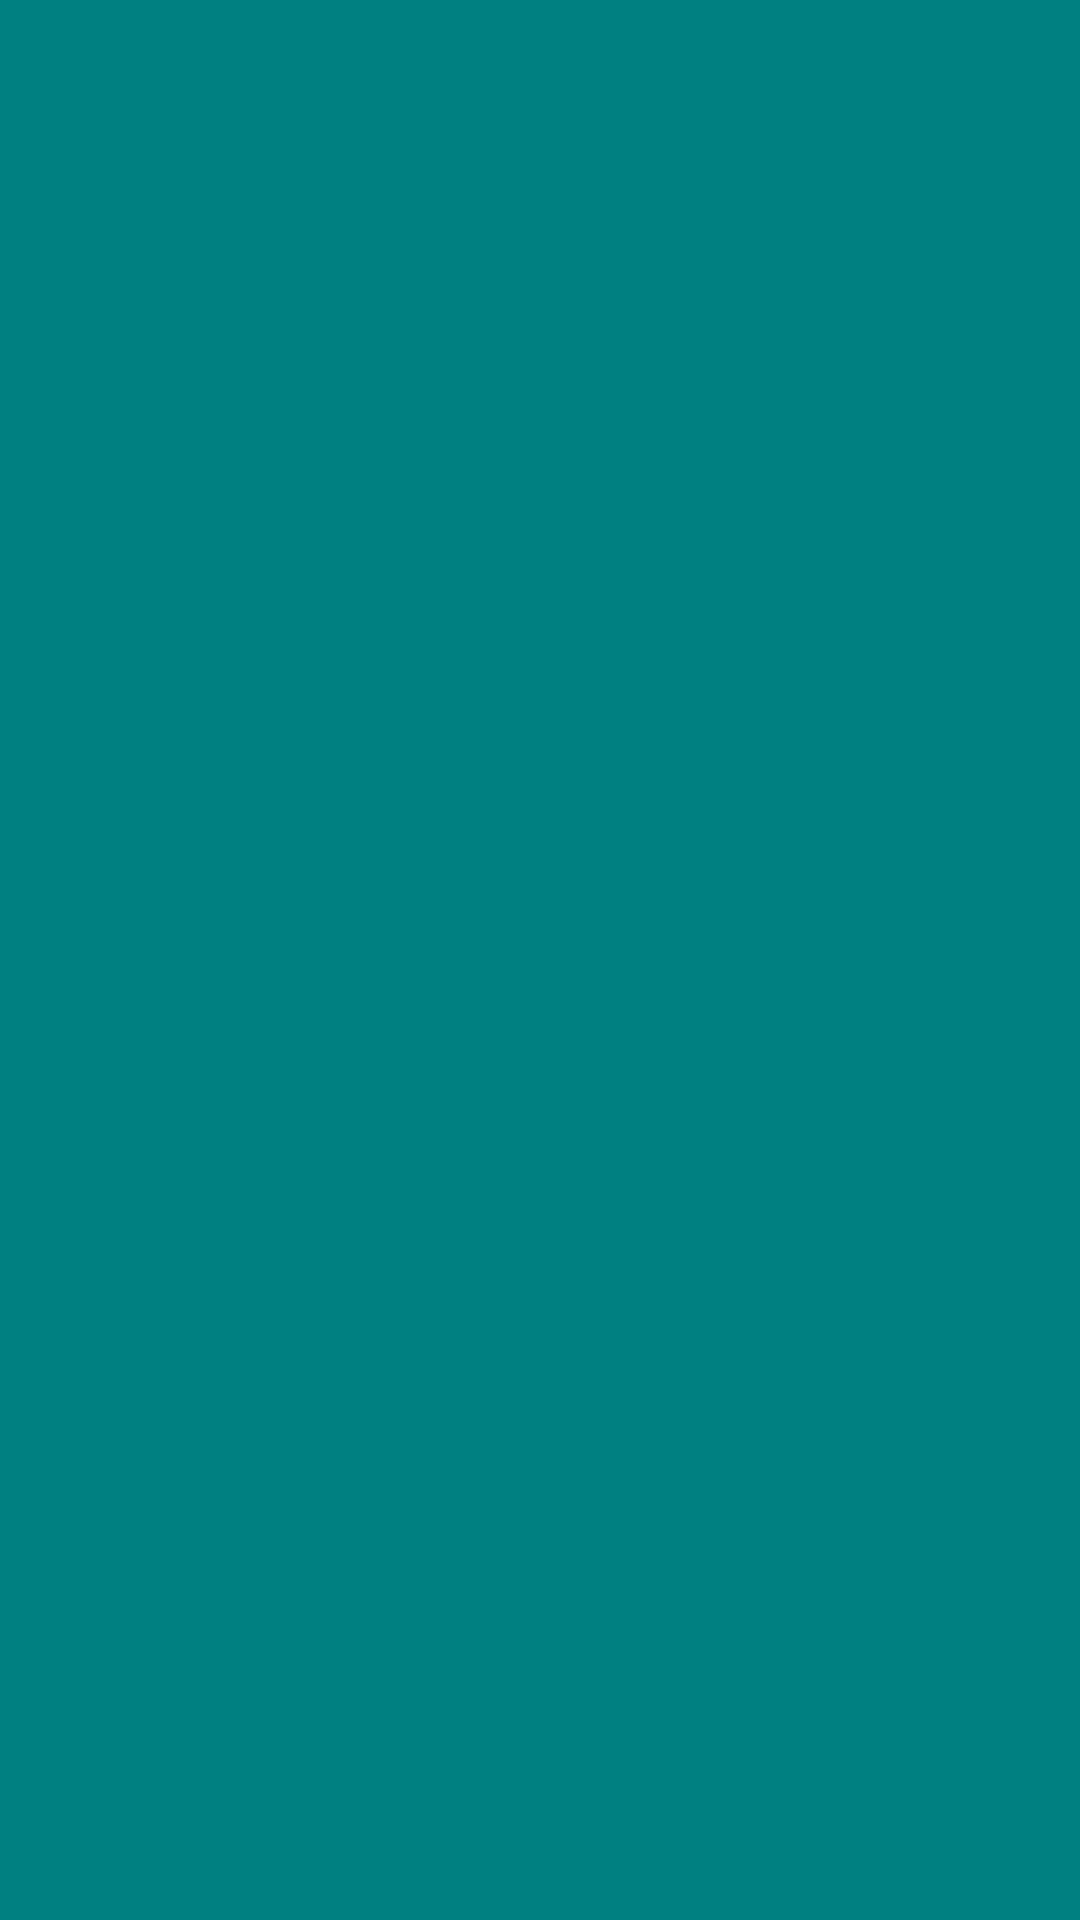 1080x1920 Teal Solid Color Background